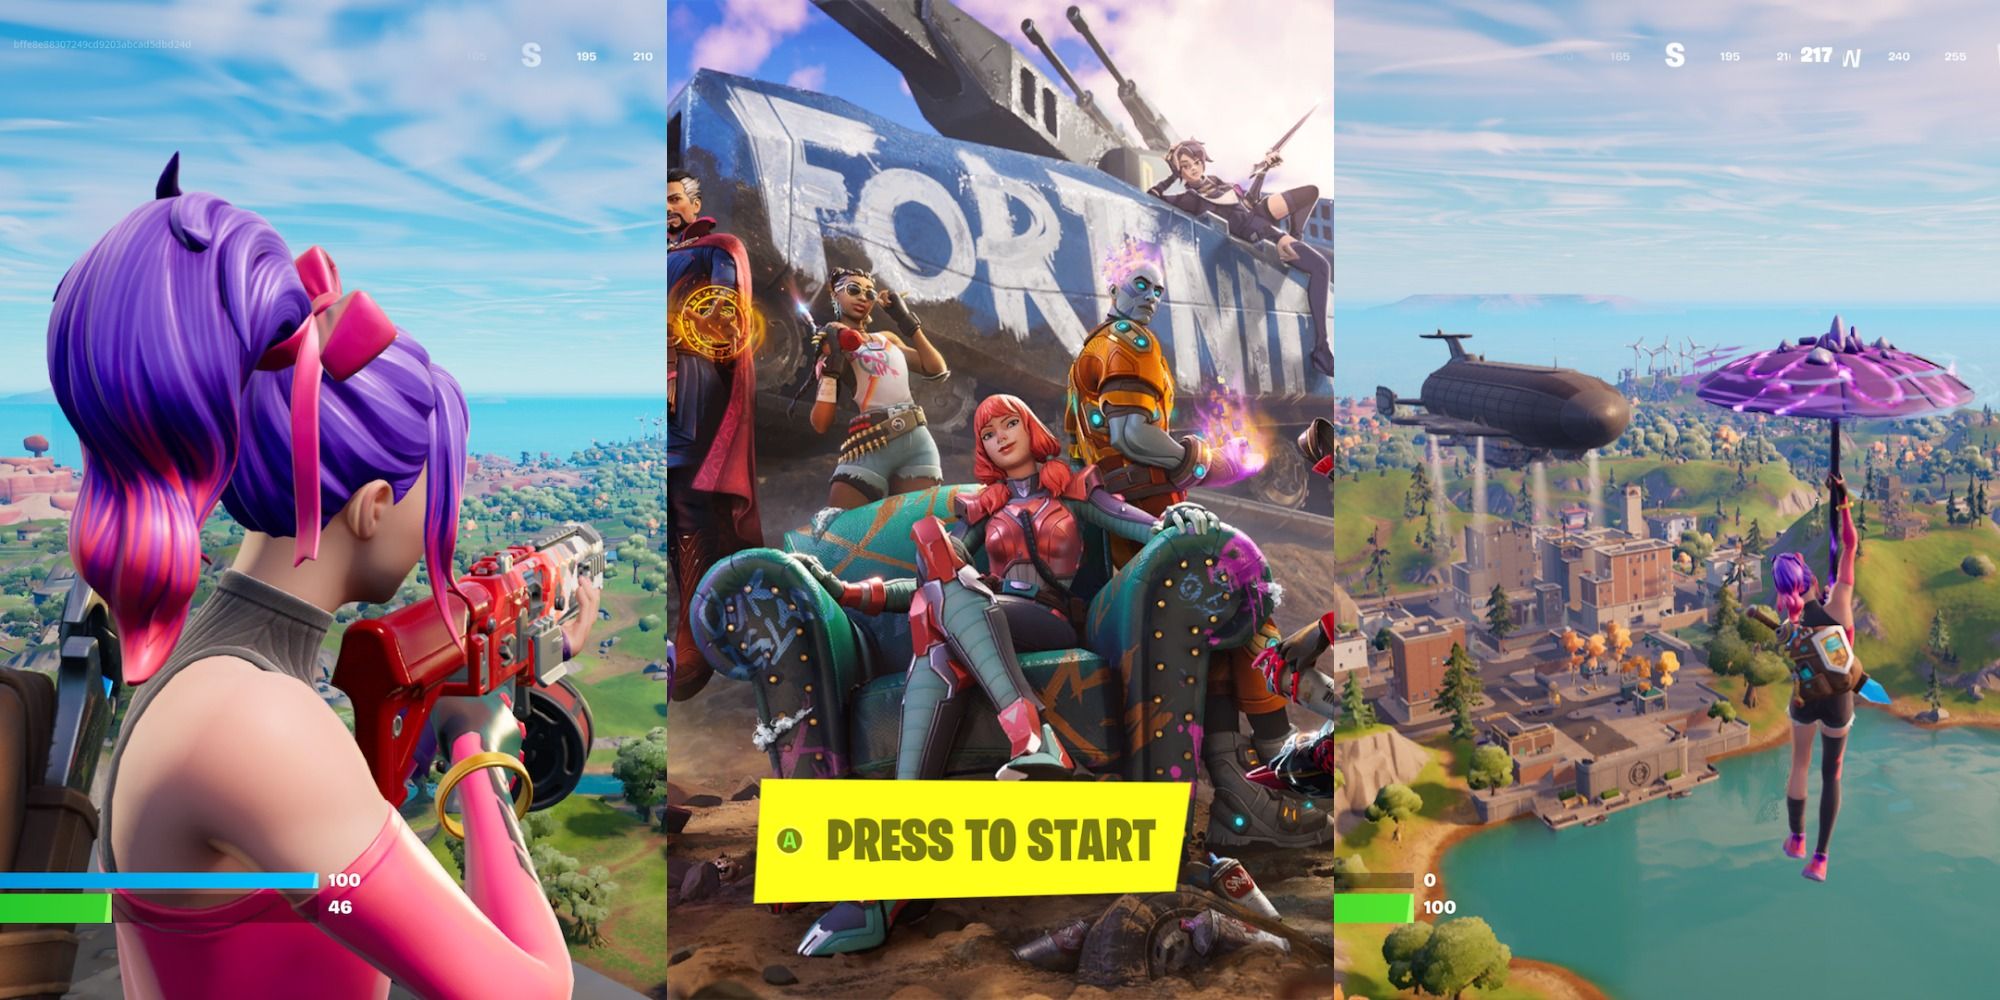 fortnite character with drum shotgun, fortnite resistance chapter title screen, fortnite character with storm umbrella featured